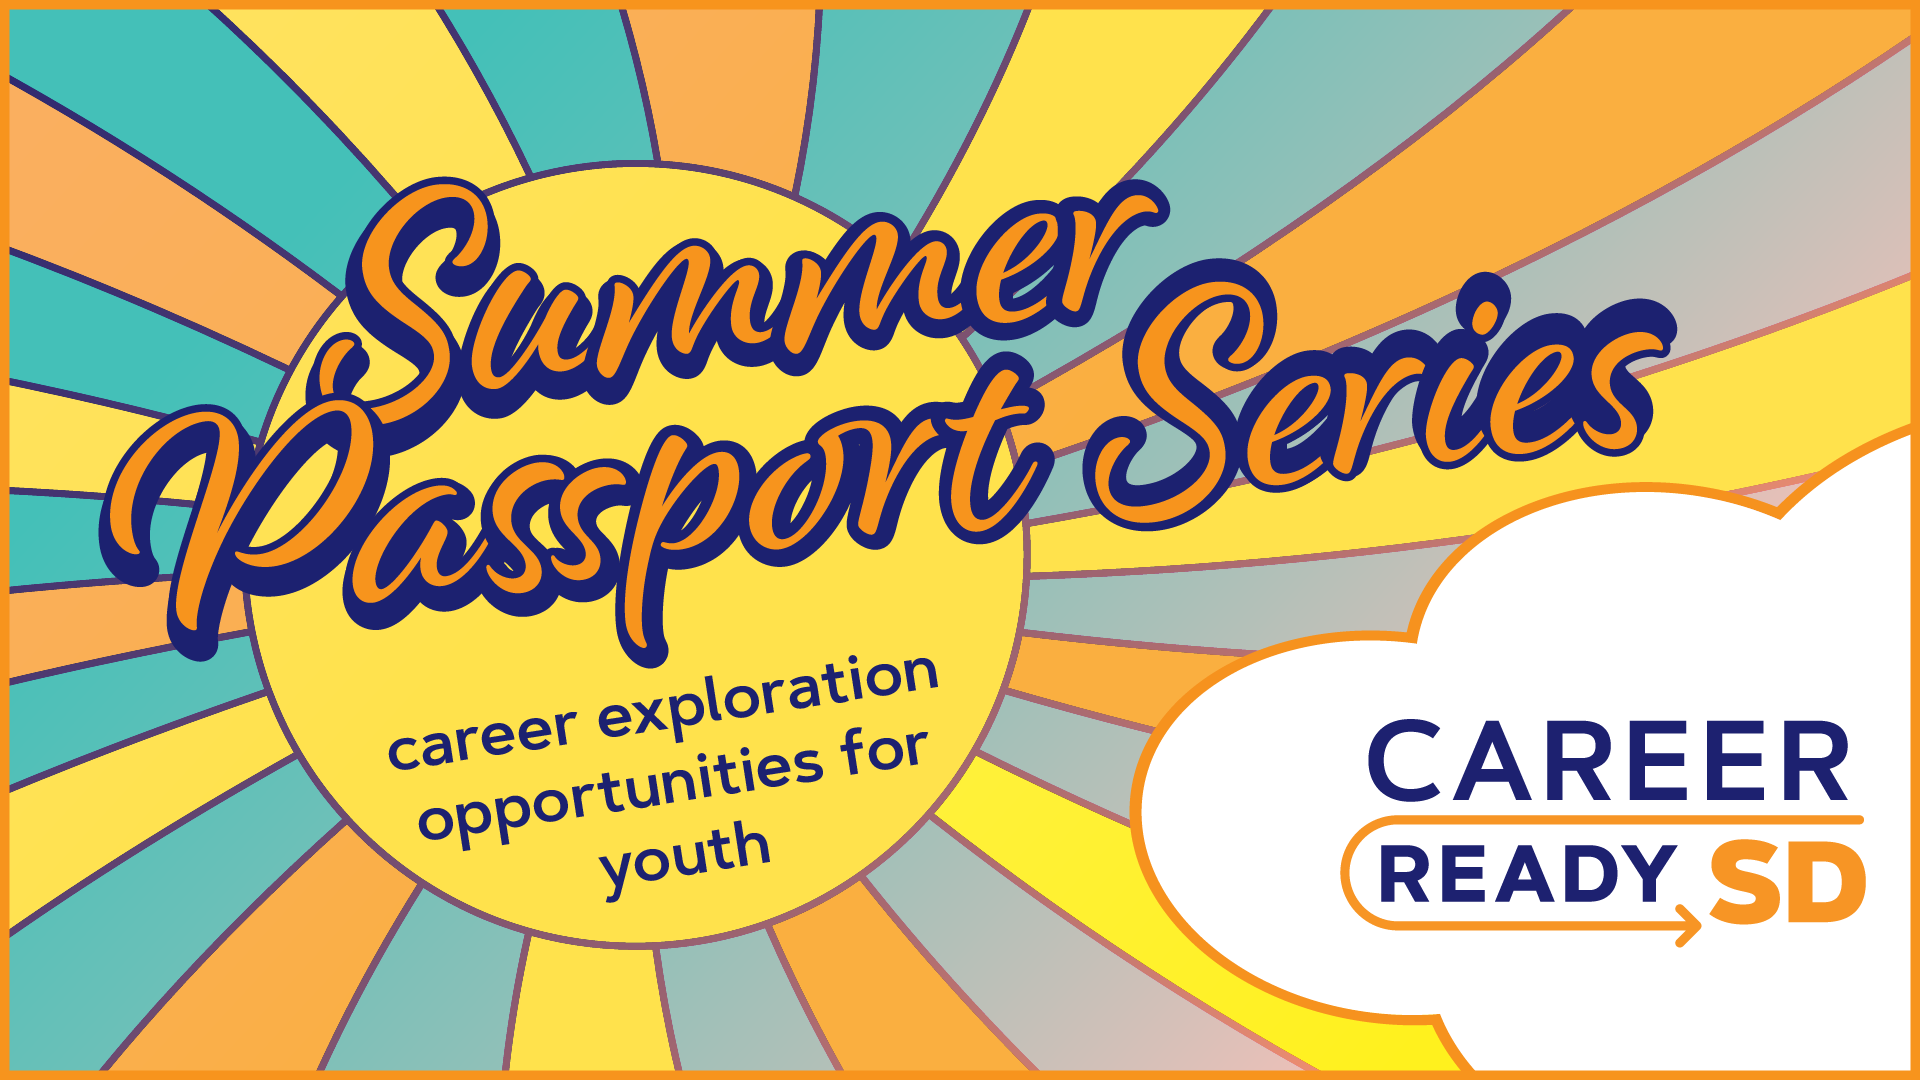 Summer Passport Series - Illustration sunshine background with multi-colored rays.  Career exploration opportunities for youth. Career Ready SD Logo in lower right corner in illustration of cloud.